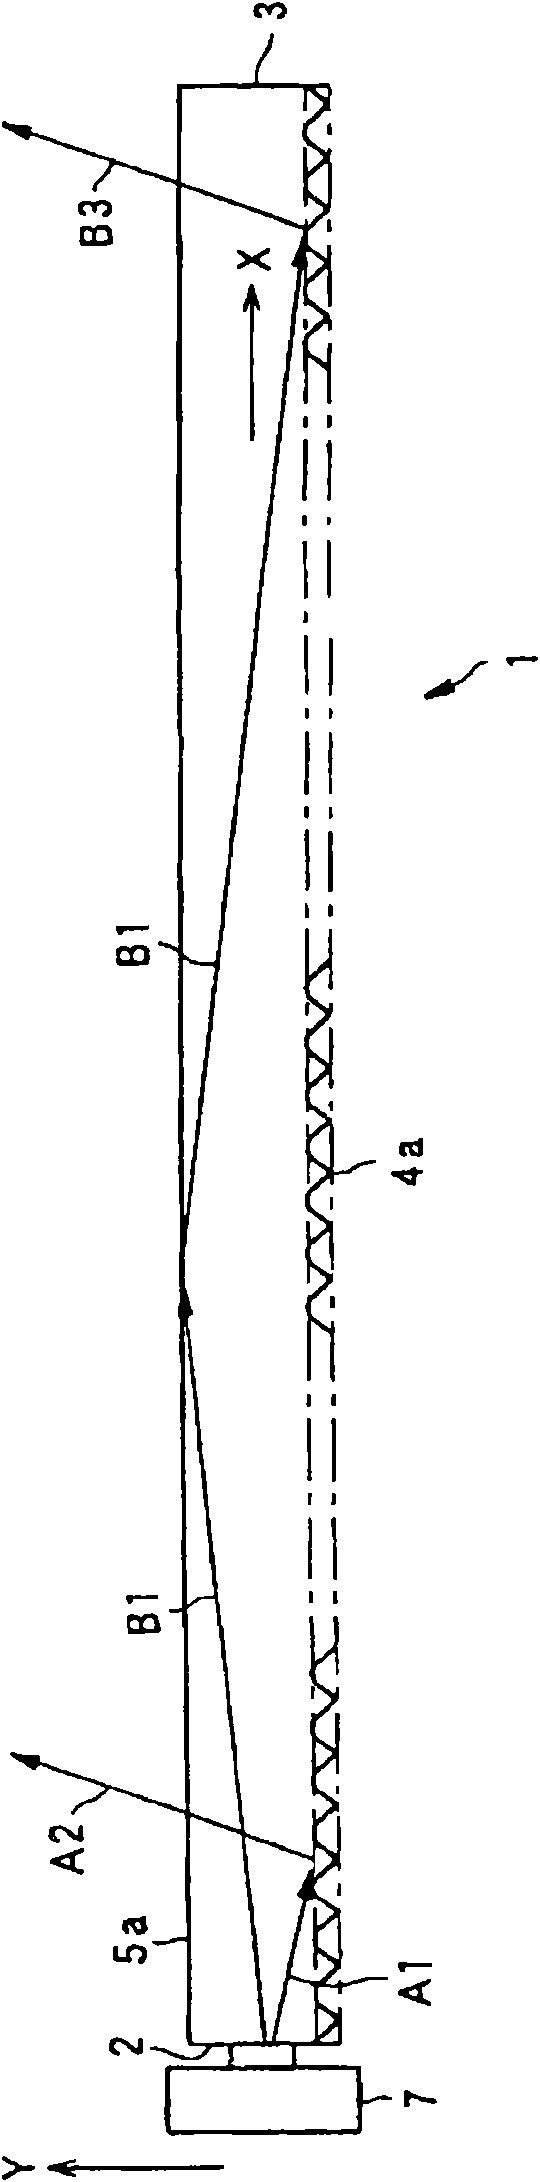 Light guide body and bicomponent linear light source device